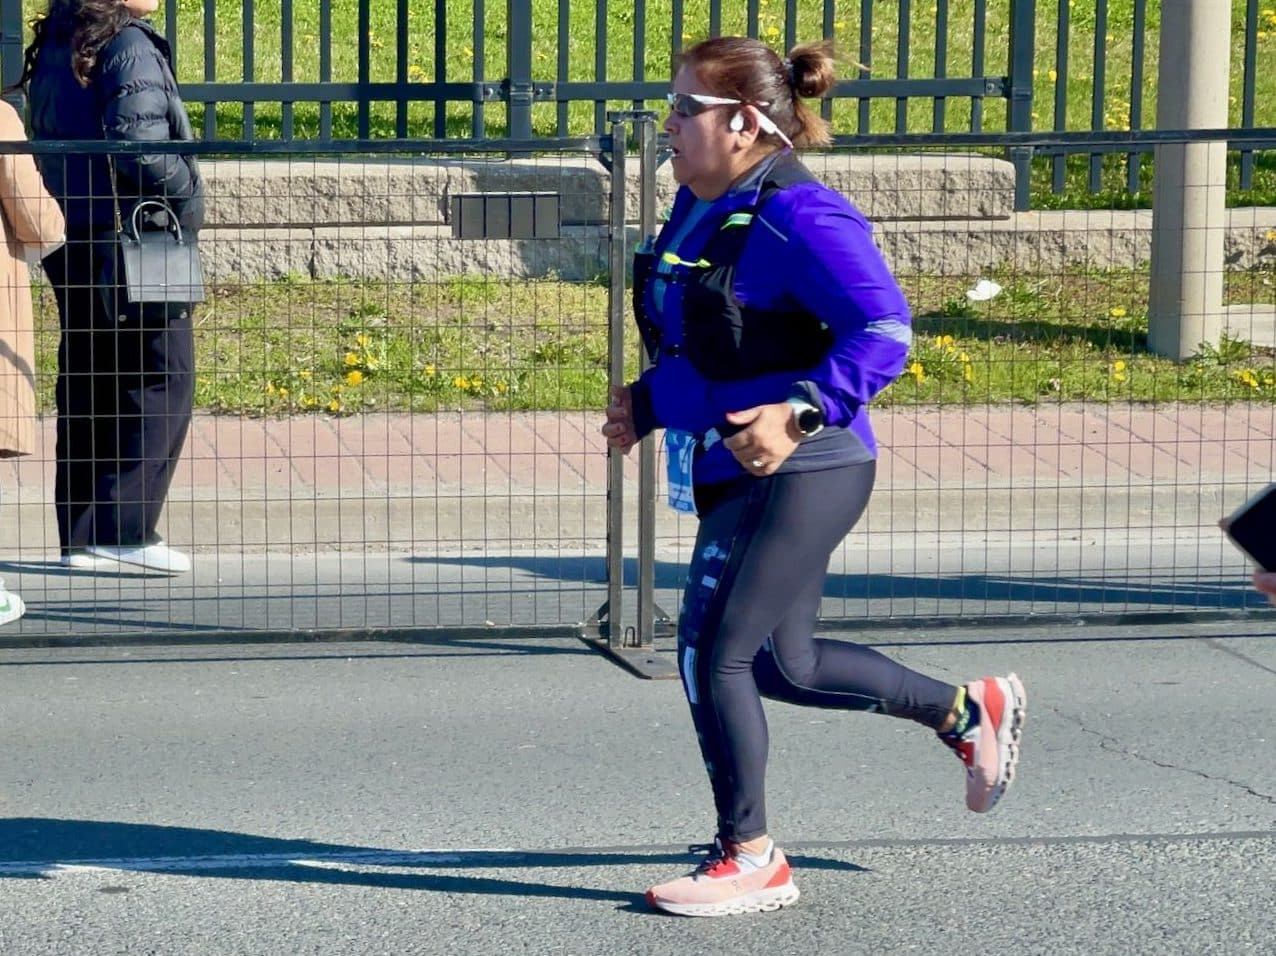 Carmen tearing towards the finish line of her first ever 10K run